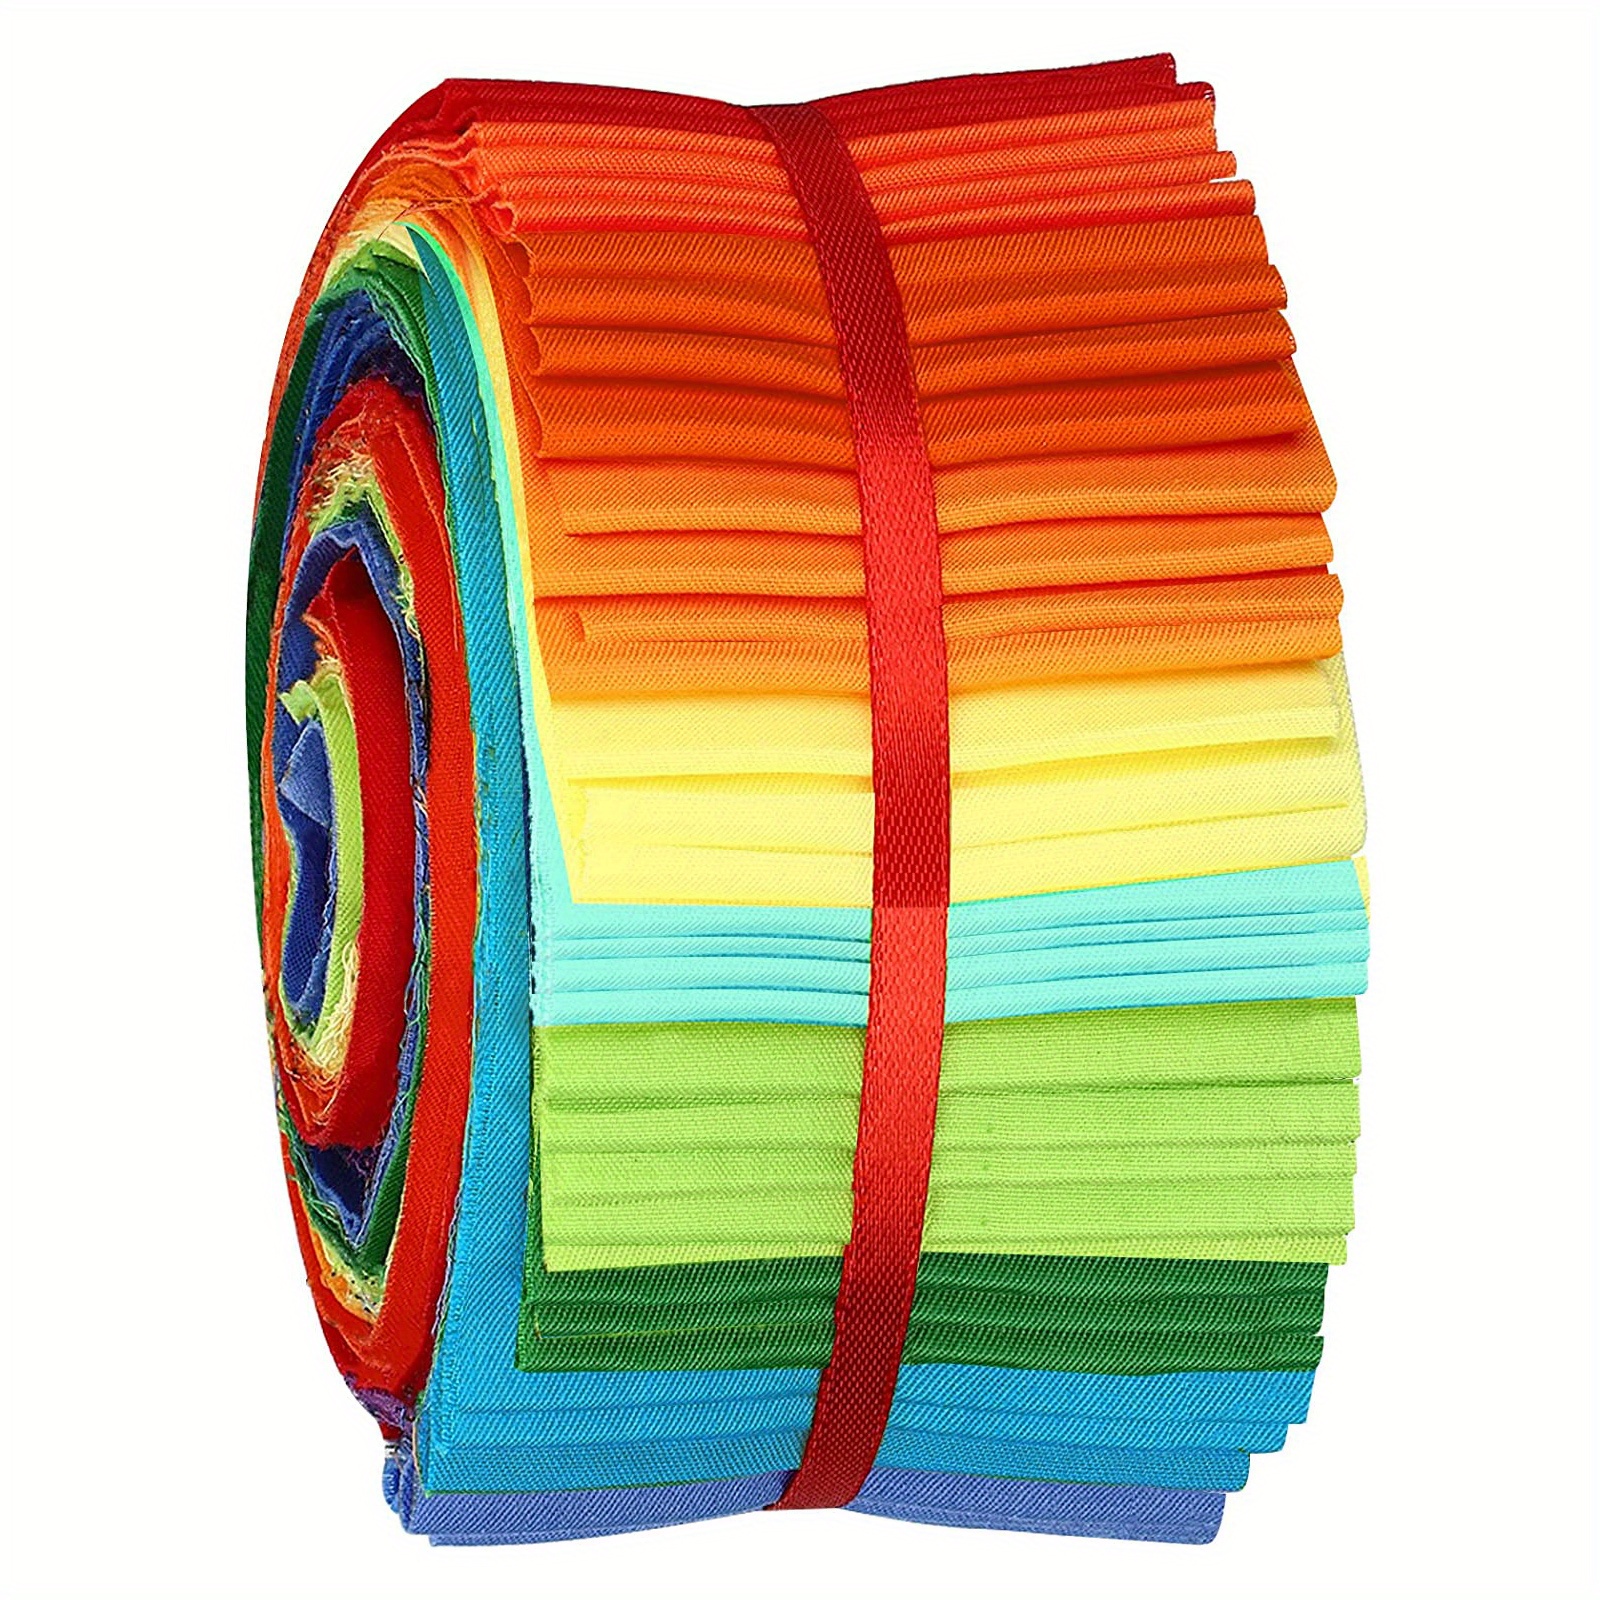 40Pcs Roll Up Cotton Fabric Quilting Strips, Jelly Roll Fabric, Cotton  Craft Fabric Bundle, Patchwork Craft Cotton Quilting Fabric, Cotton Fabric